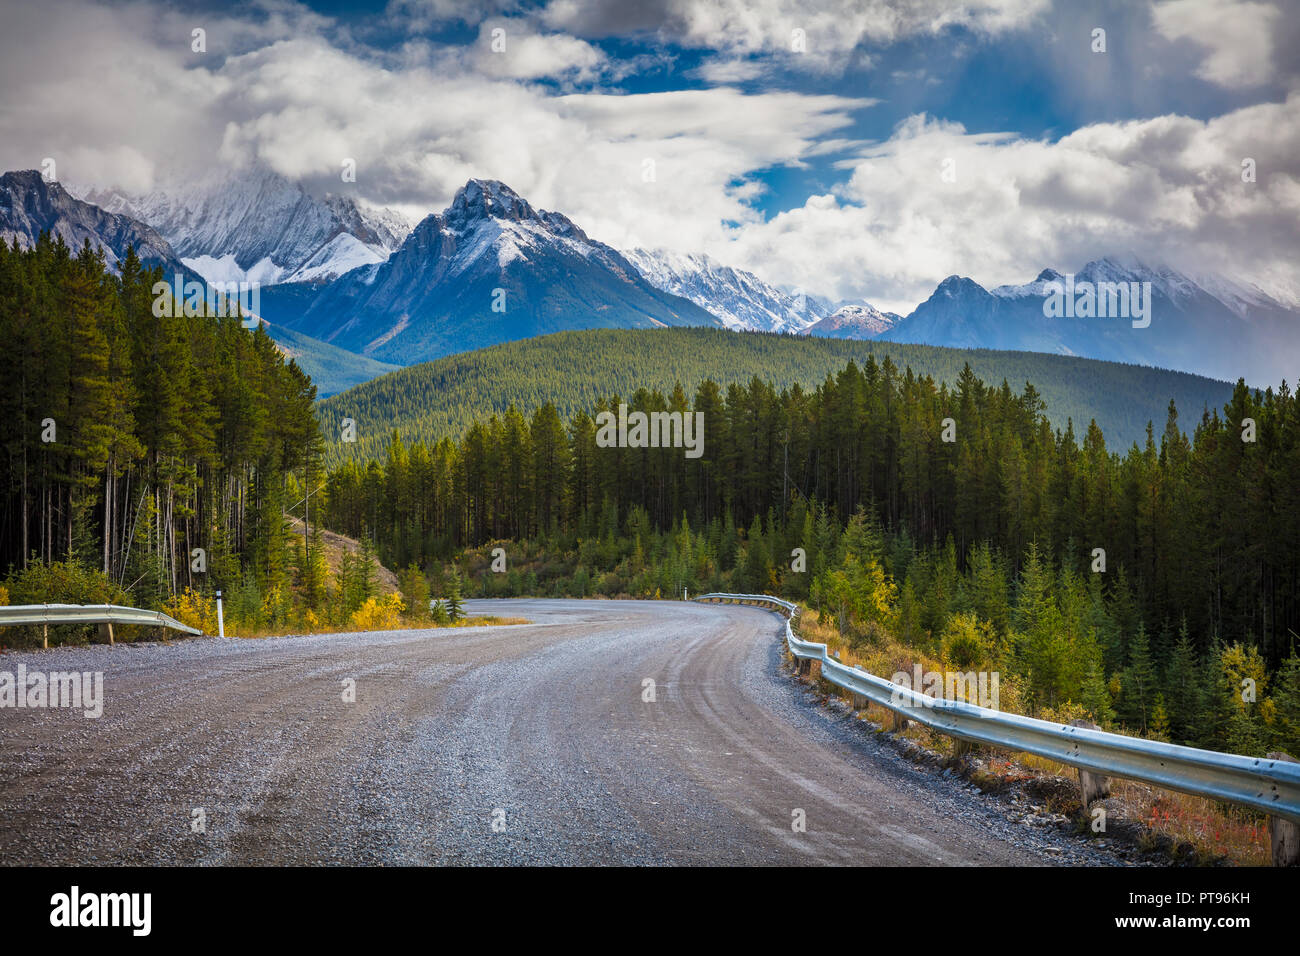 Kananaskis Country is a park system situated to the west of Calgary, Alberta, Canada in the foothills and front ranges of the Canadian Rockies. Kanana Stock Photo